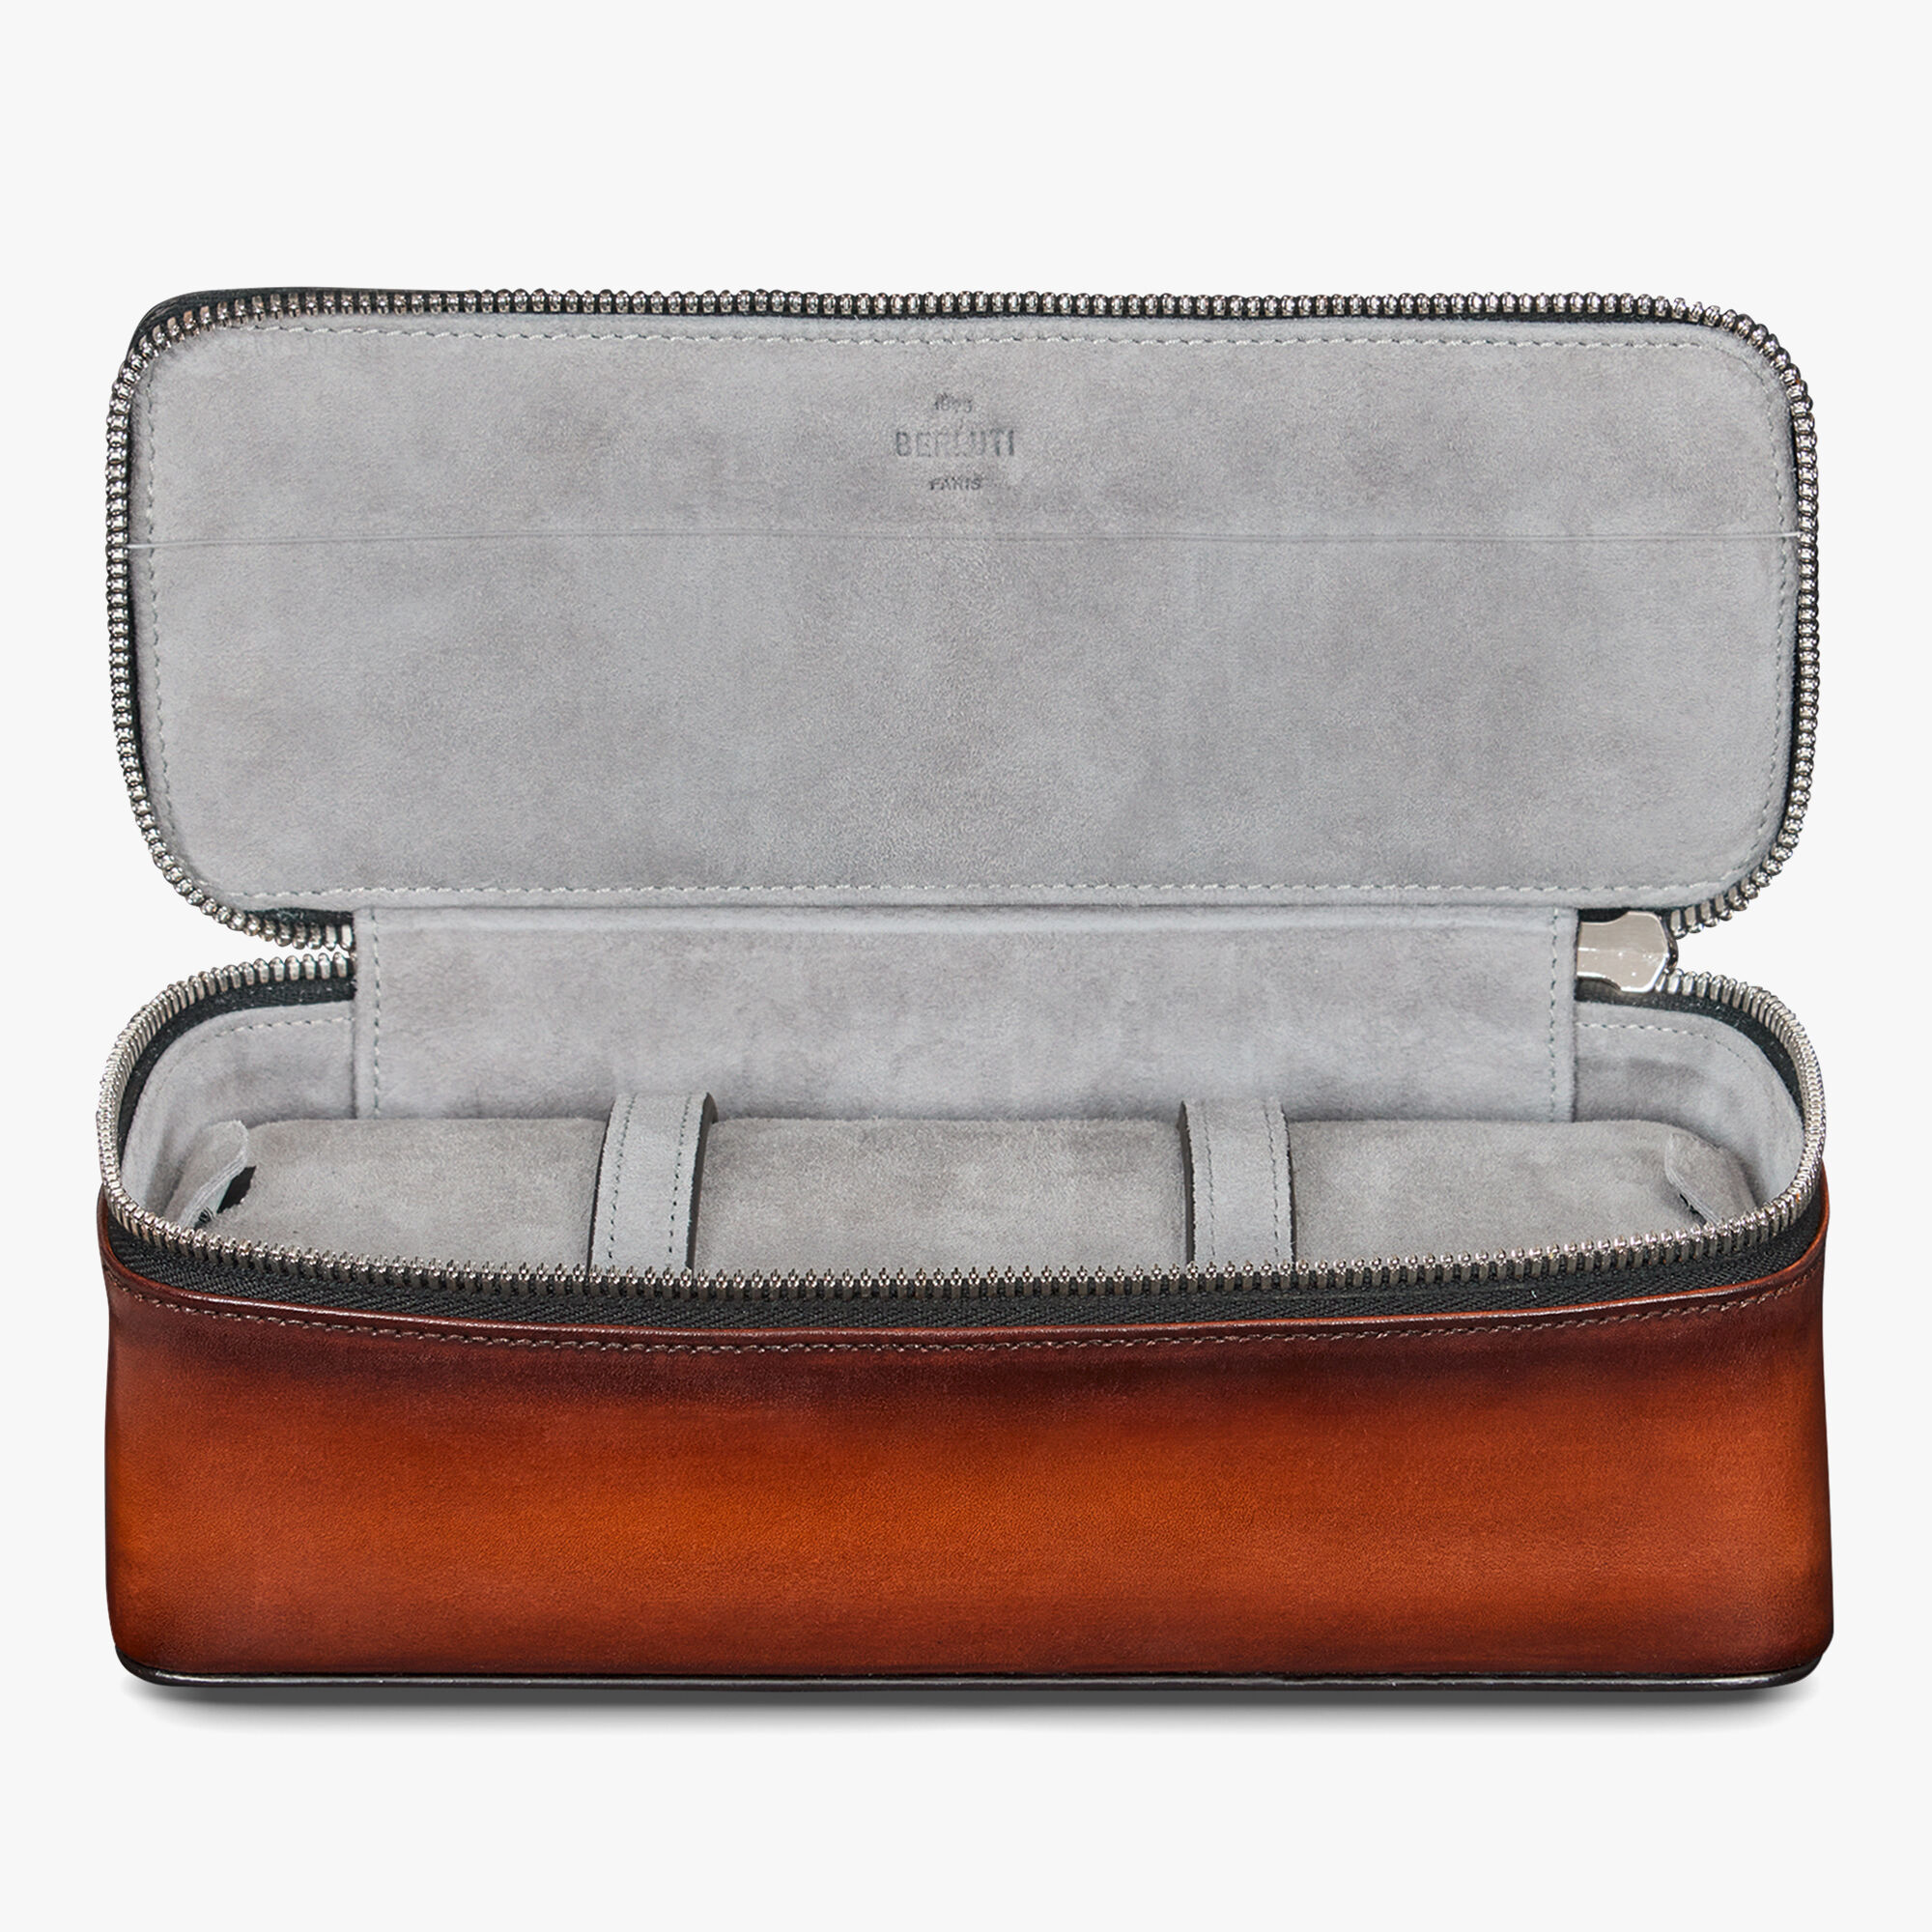 Wallet collections by Berluti - BE